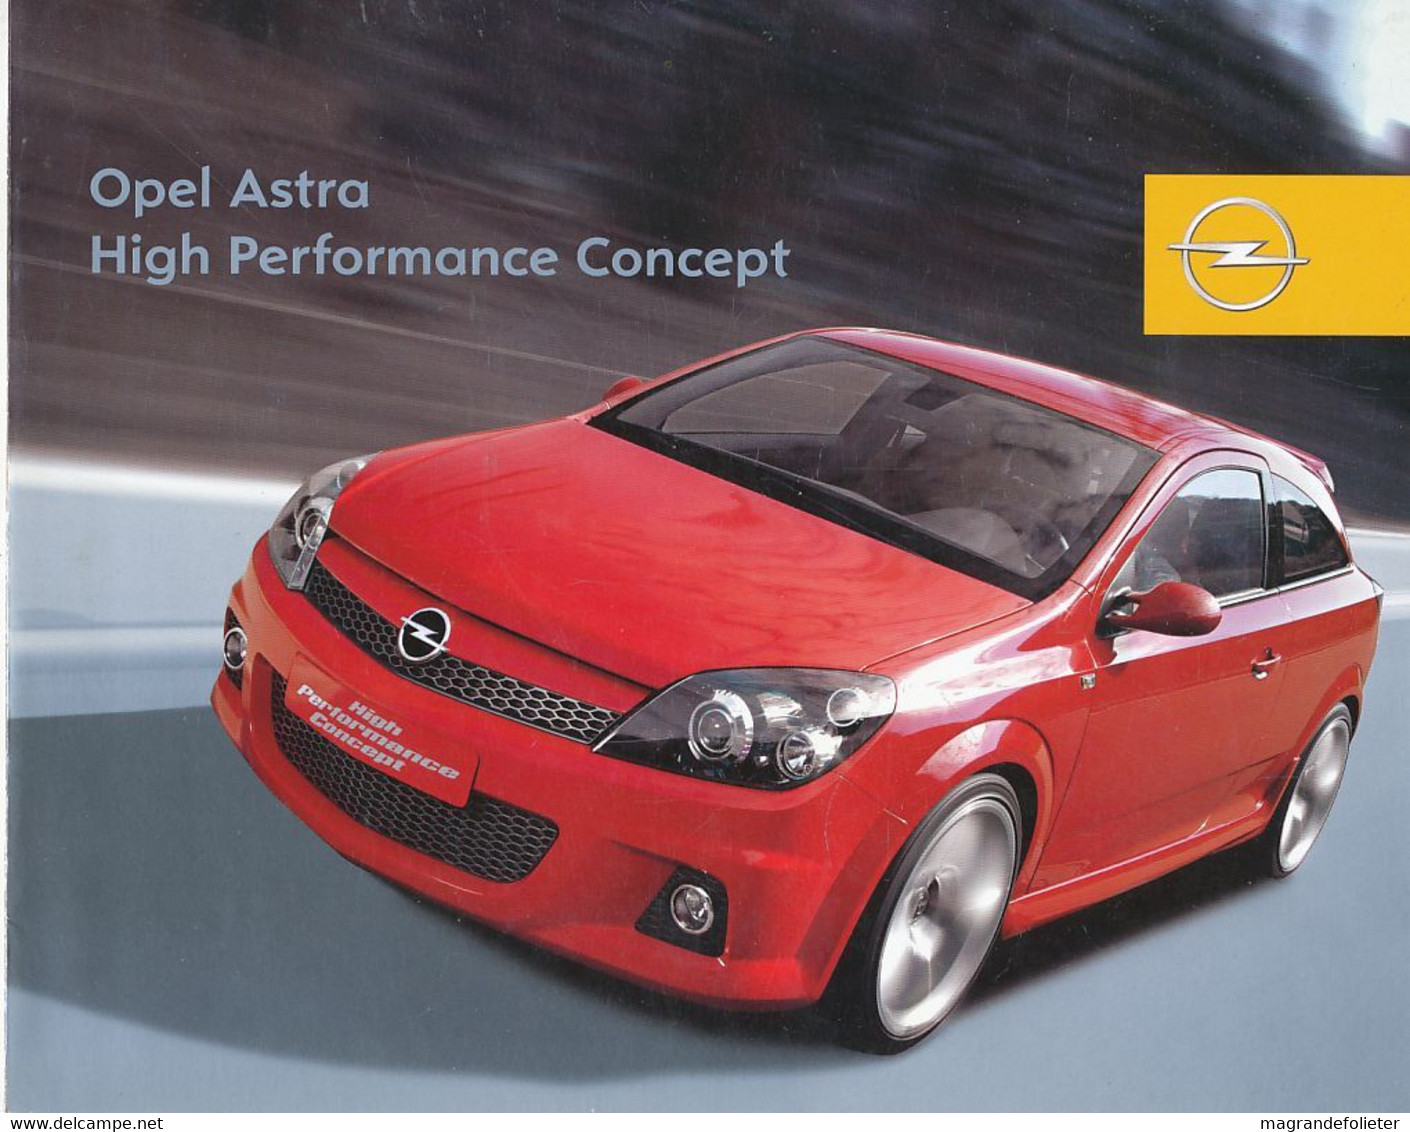 CATALOGUE VOITURE  OPEL ASTRA - Voitures